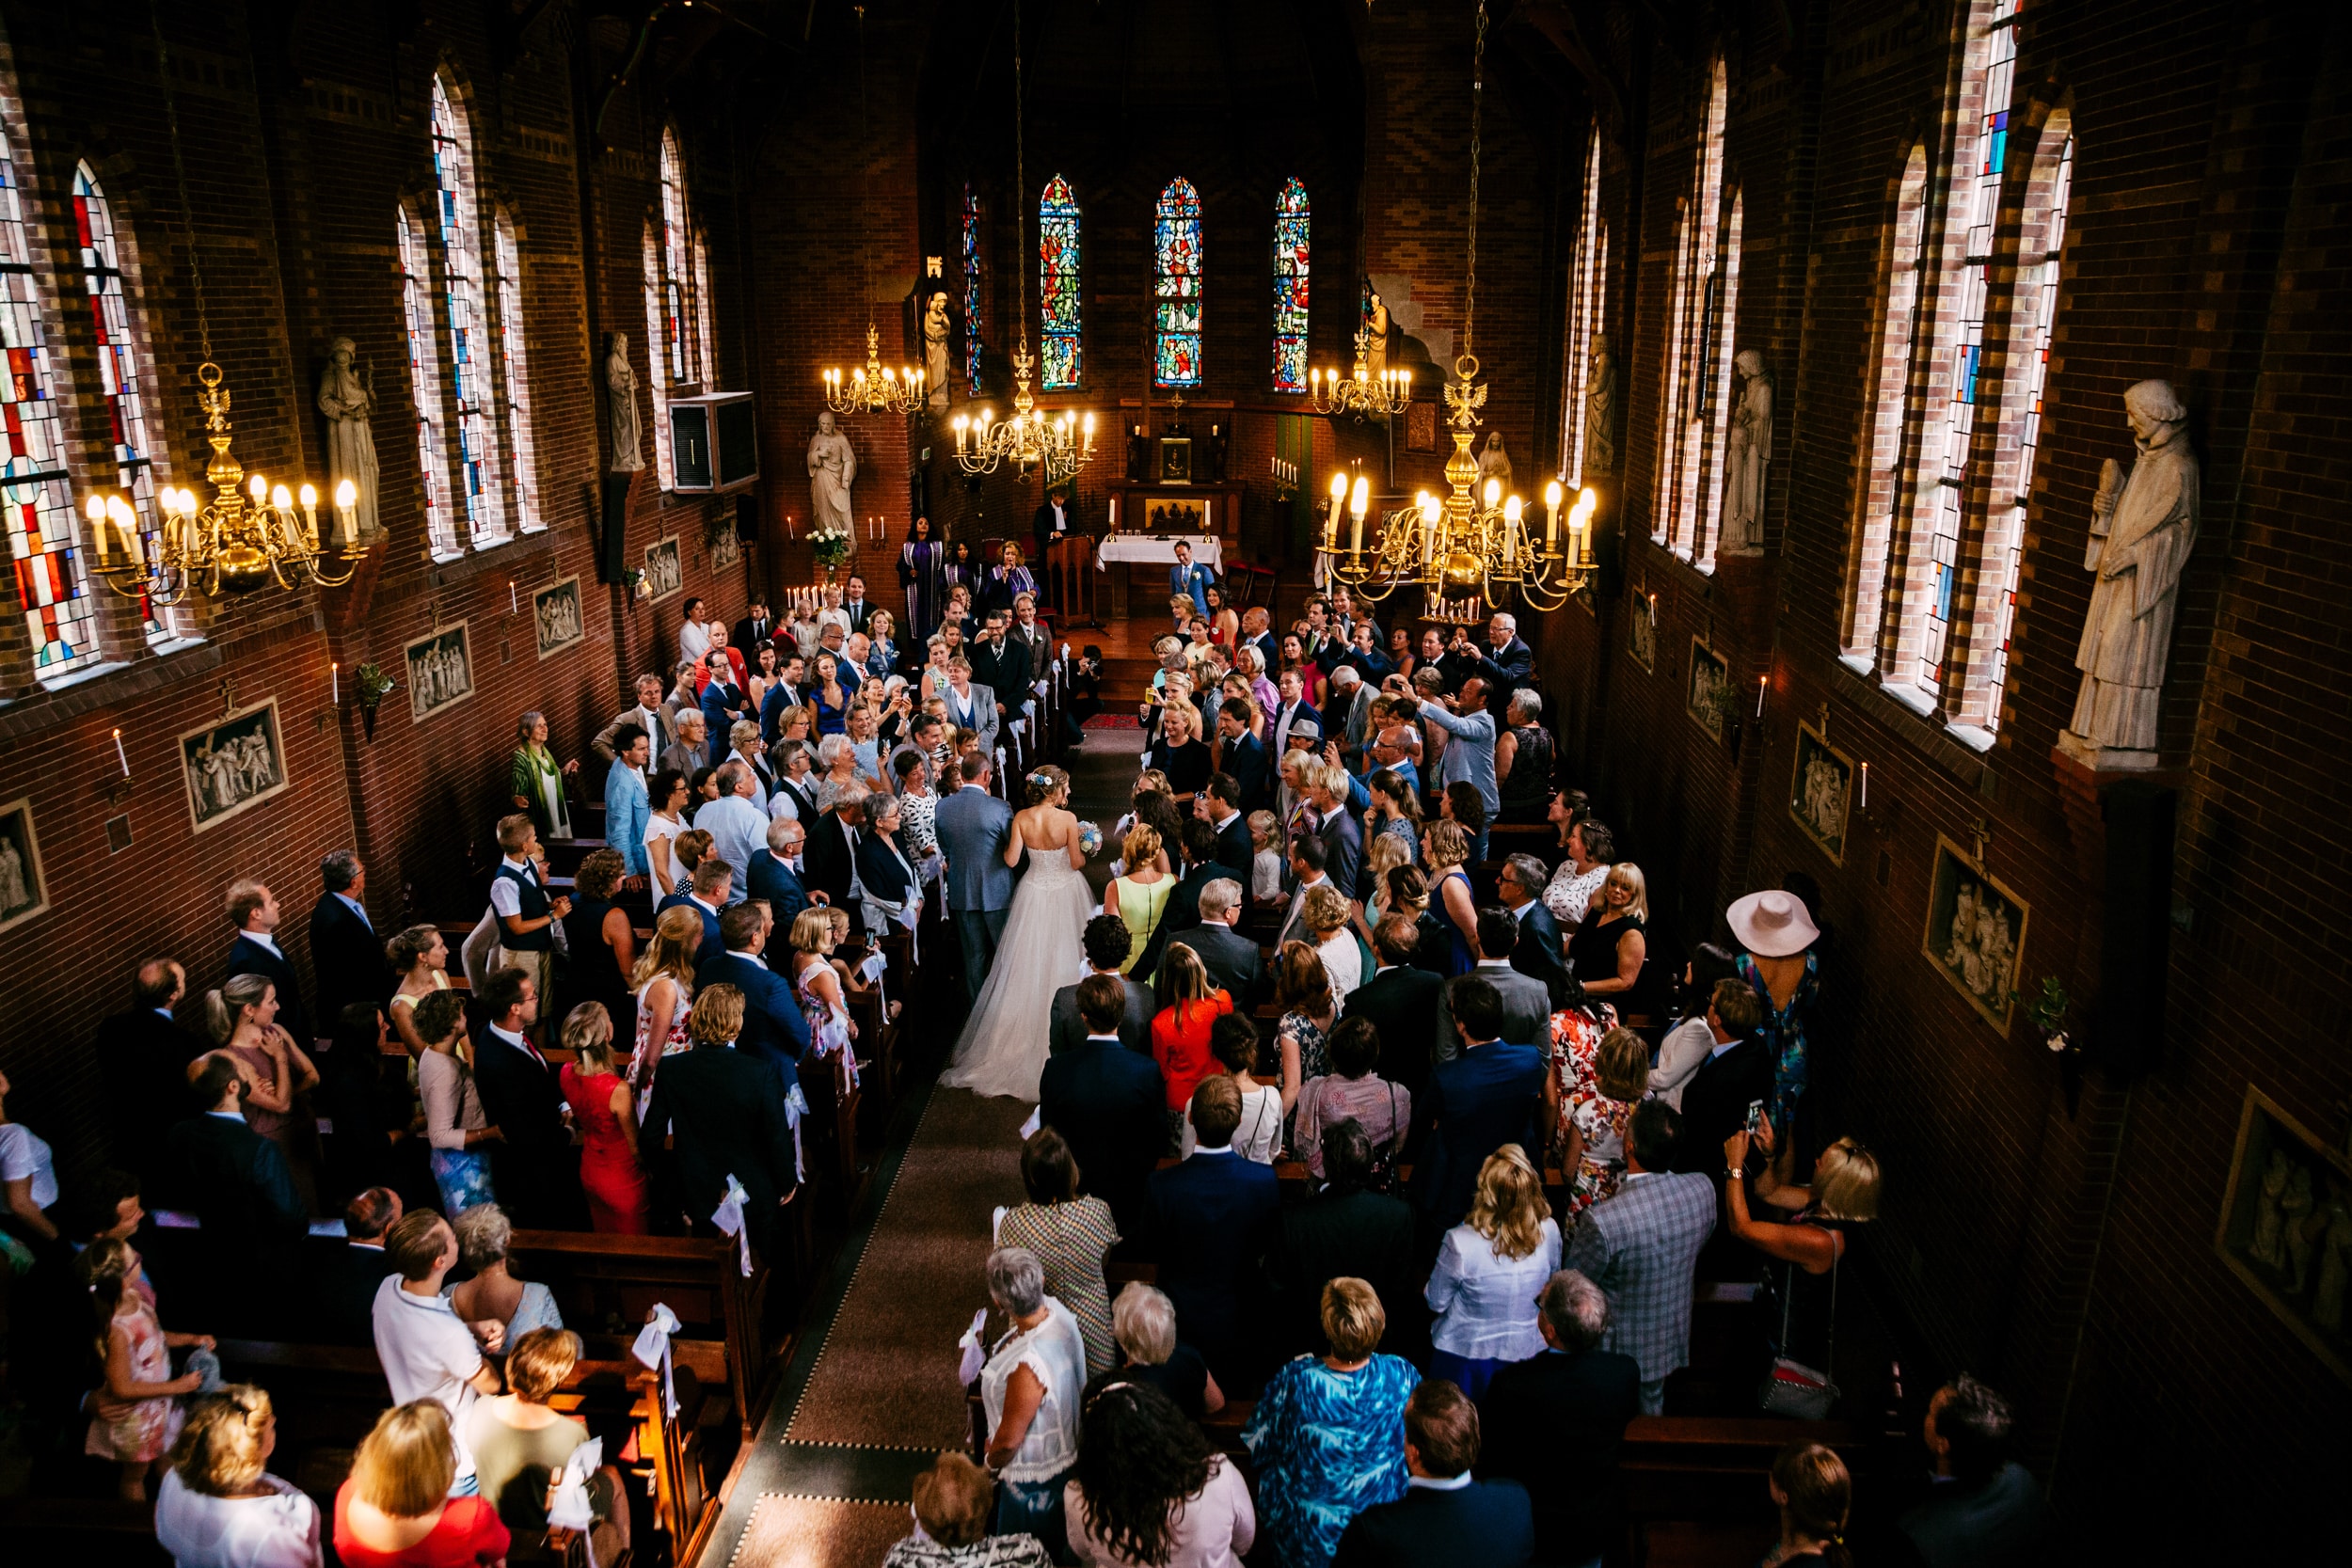 A wedding ceremony in a church with lots of crowds and wedding songs.